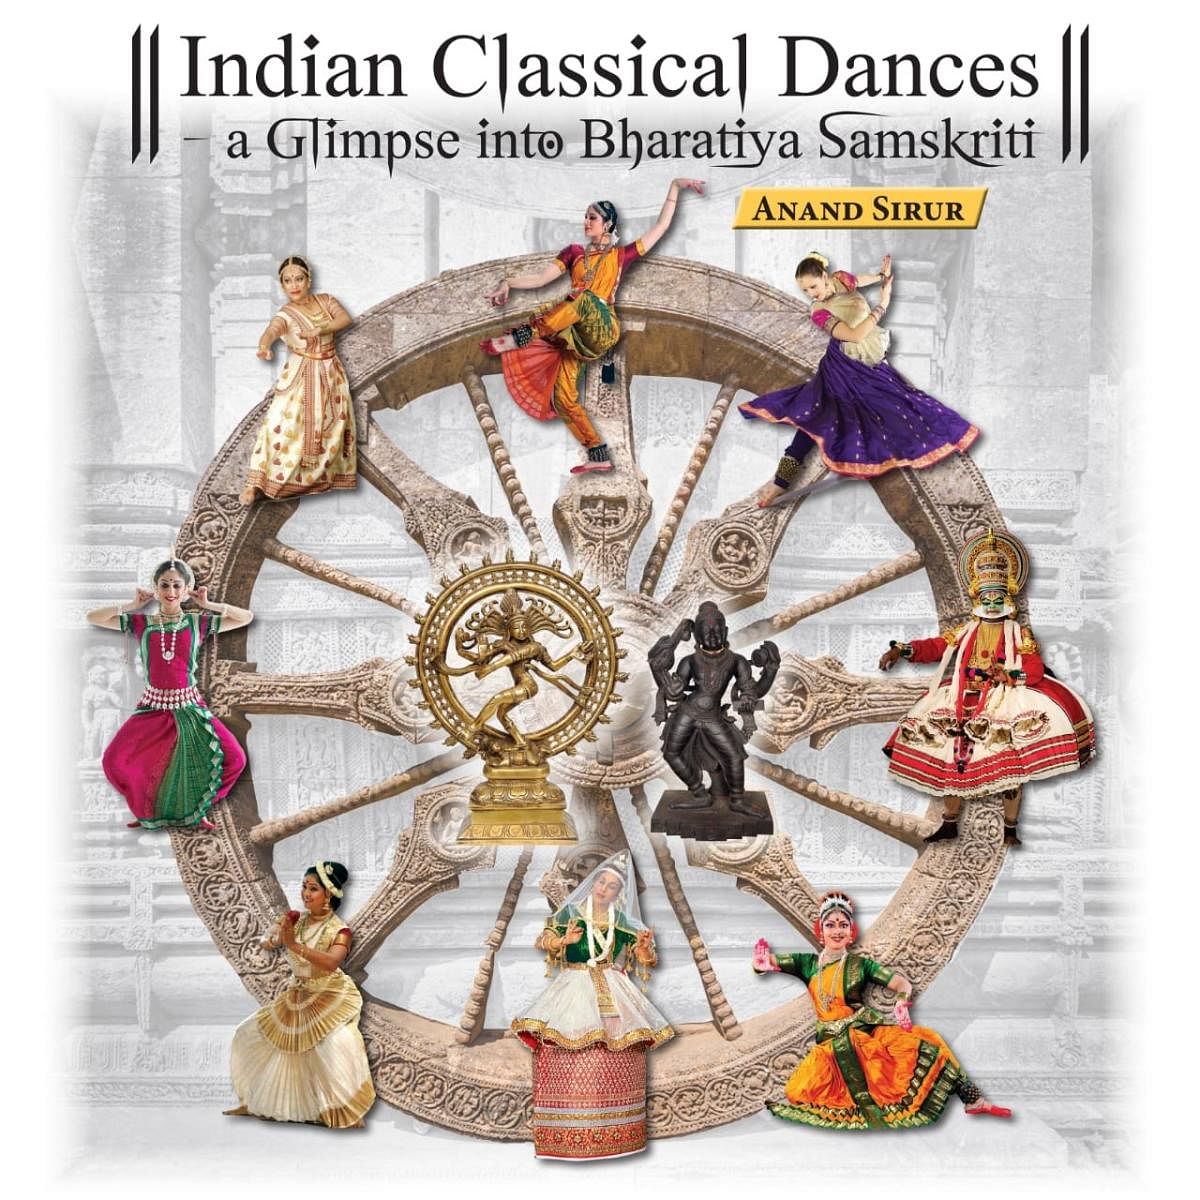 Book on Indian dances released